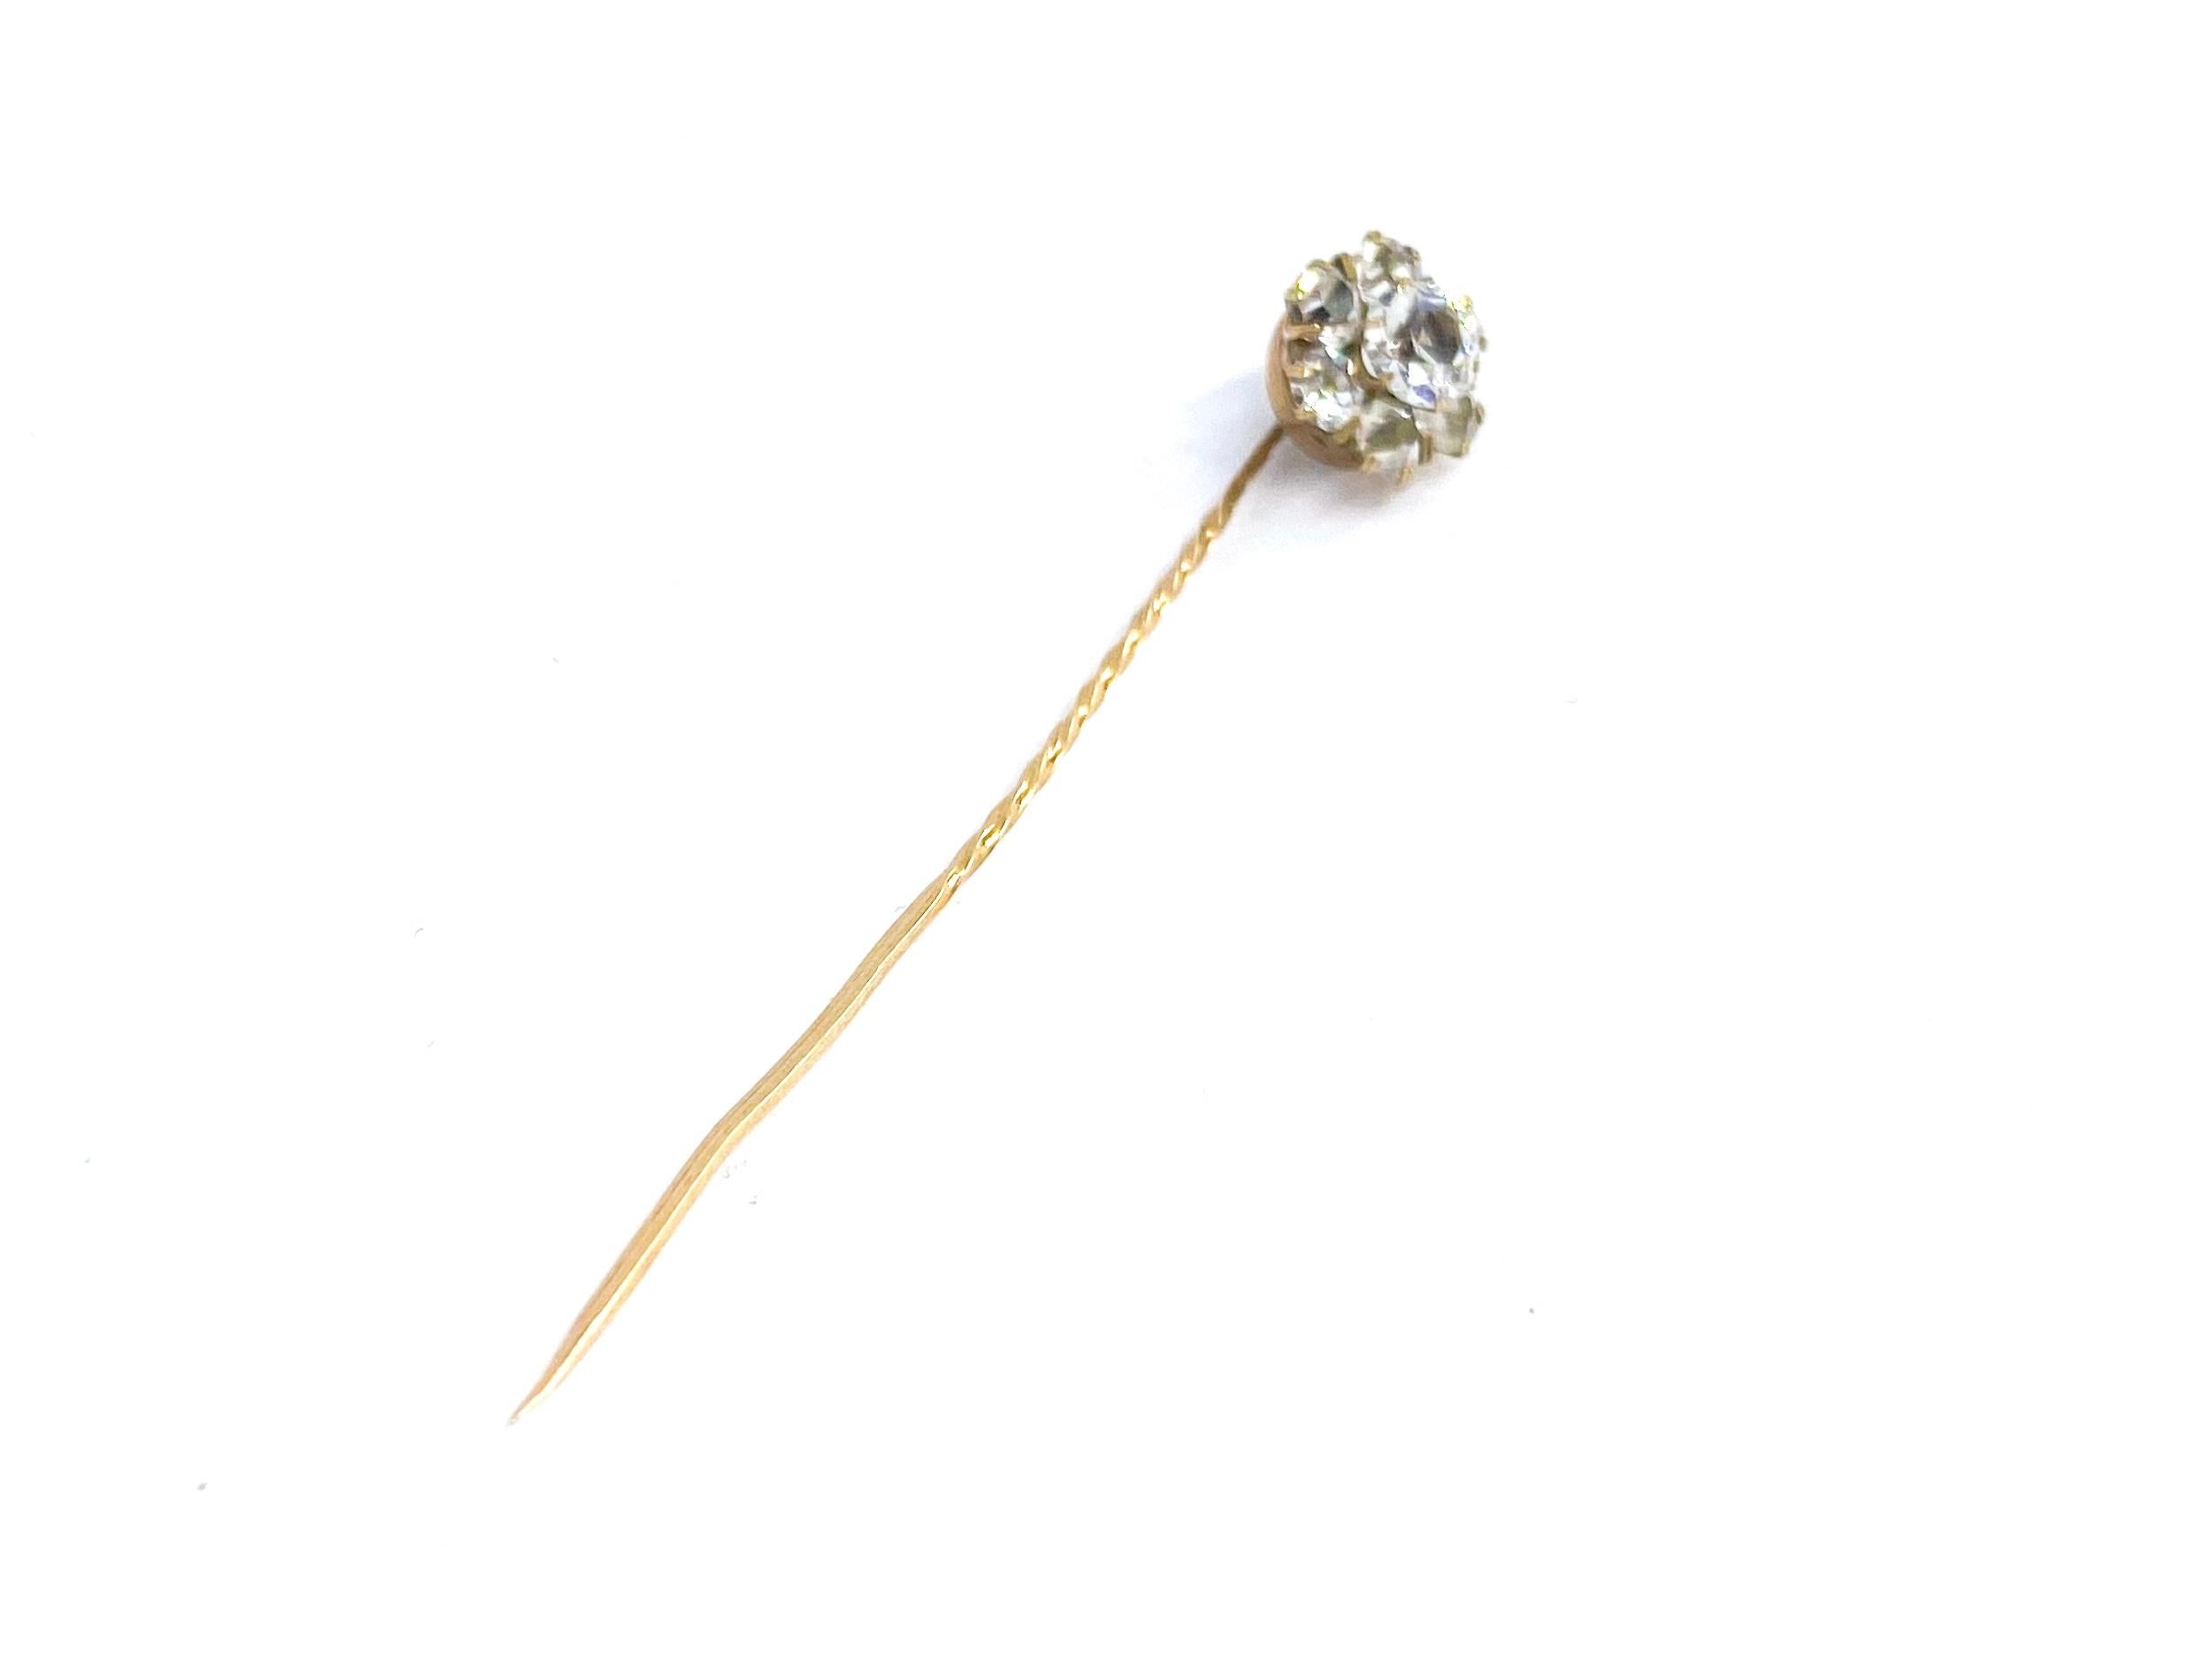 14 Karat Yellow Gold Stickpin. 56 Stamp Russia
Russian stamps are all partially visible.
56 gold. Head,? OW.
I don't know which stones, not Diamonds.
Needle a little bent, we have not straightened.